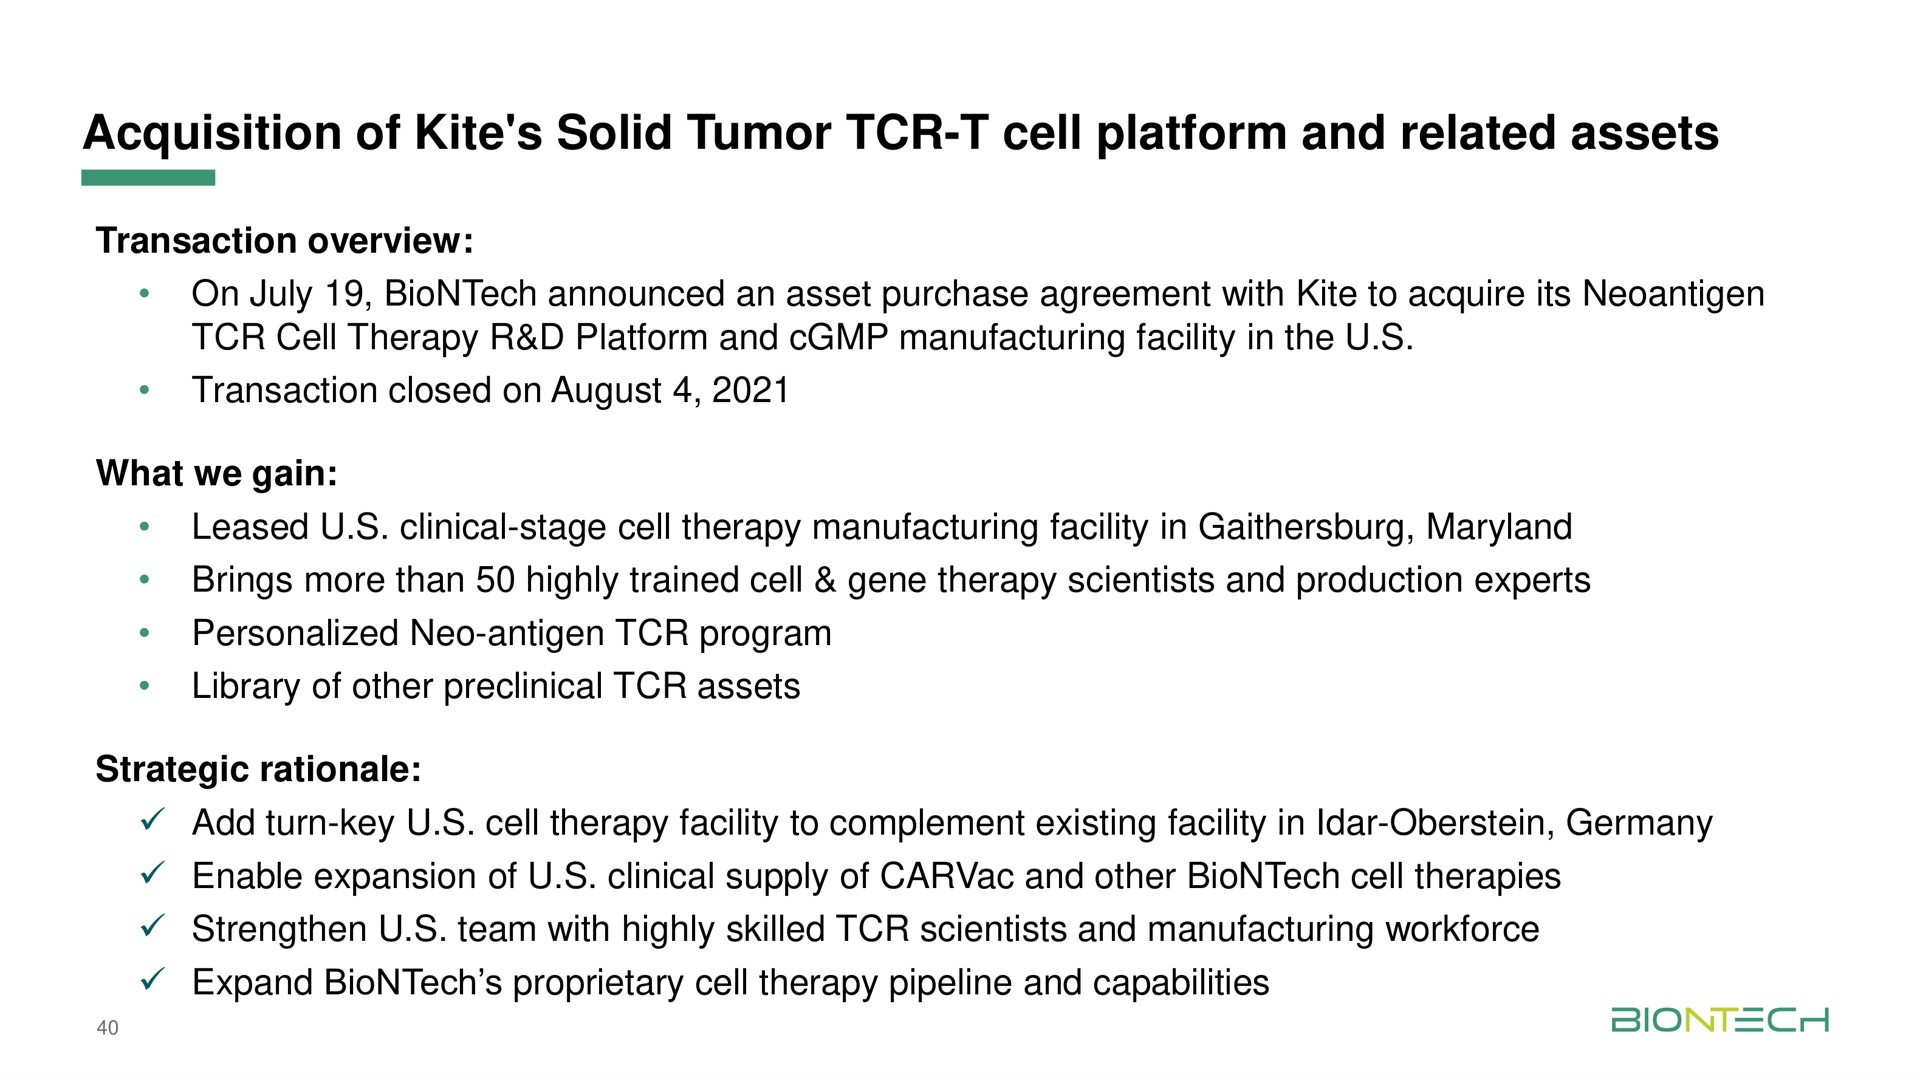 acquisition of kite solid tumor cell platform and related assets | BioNTech